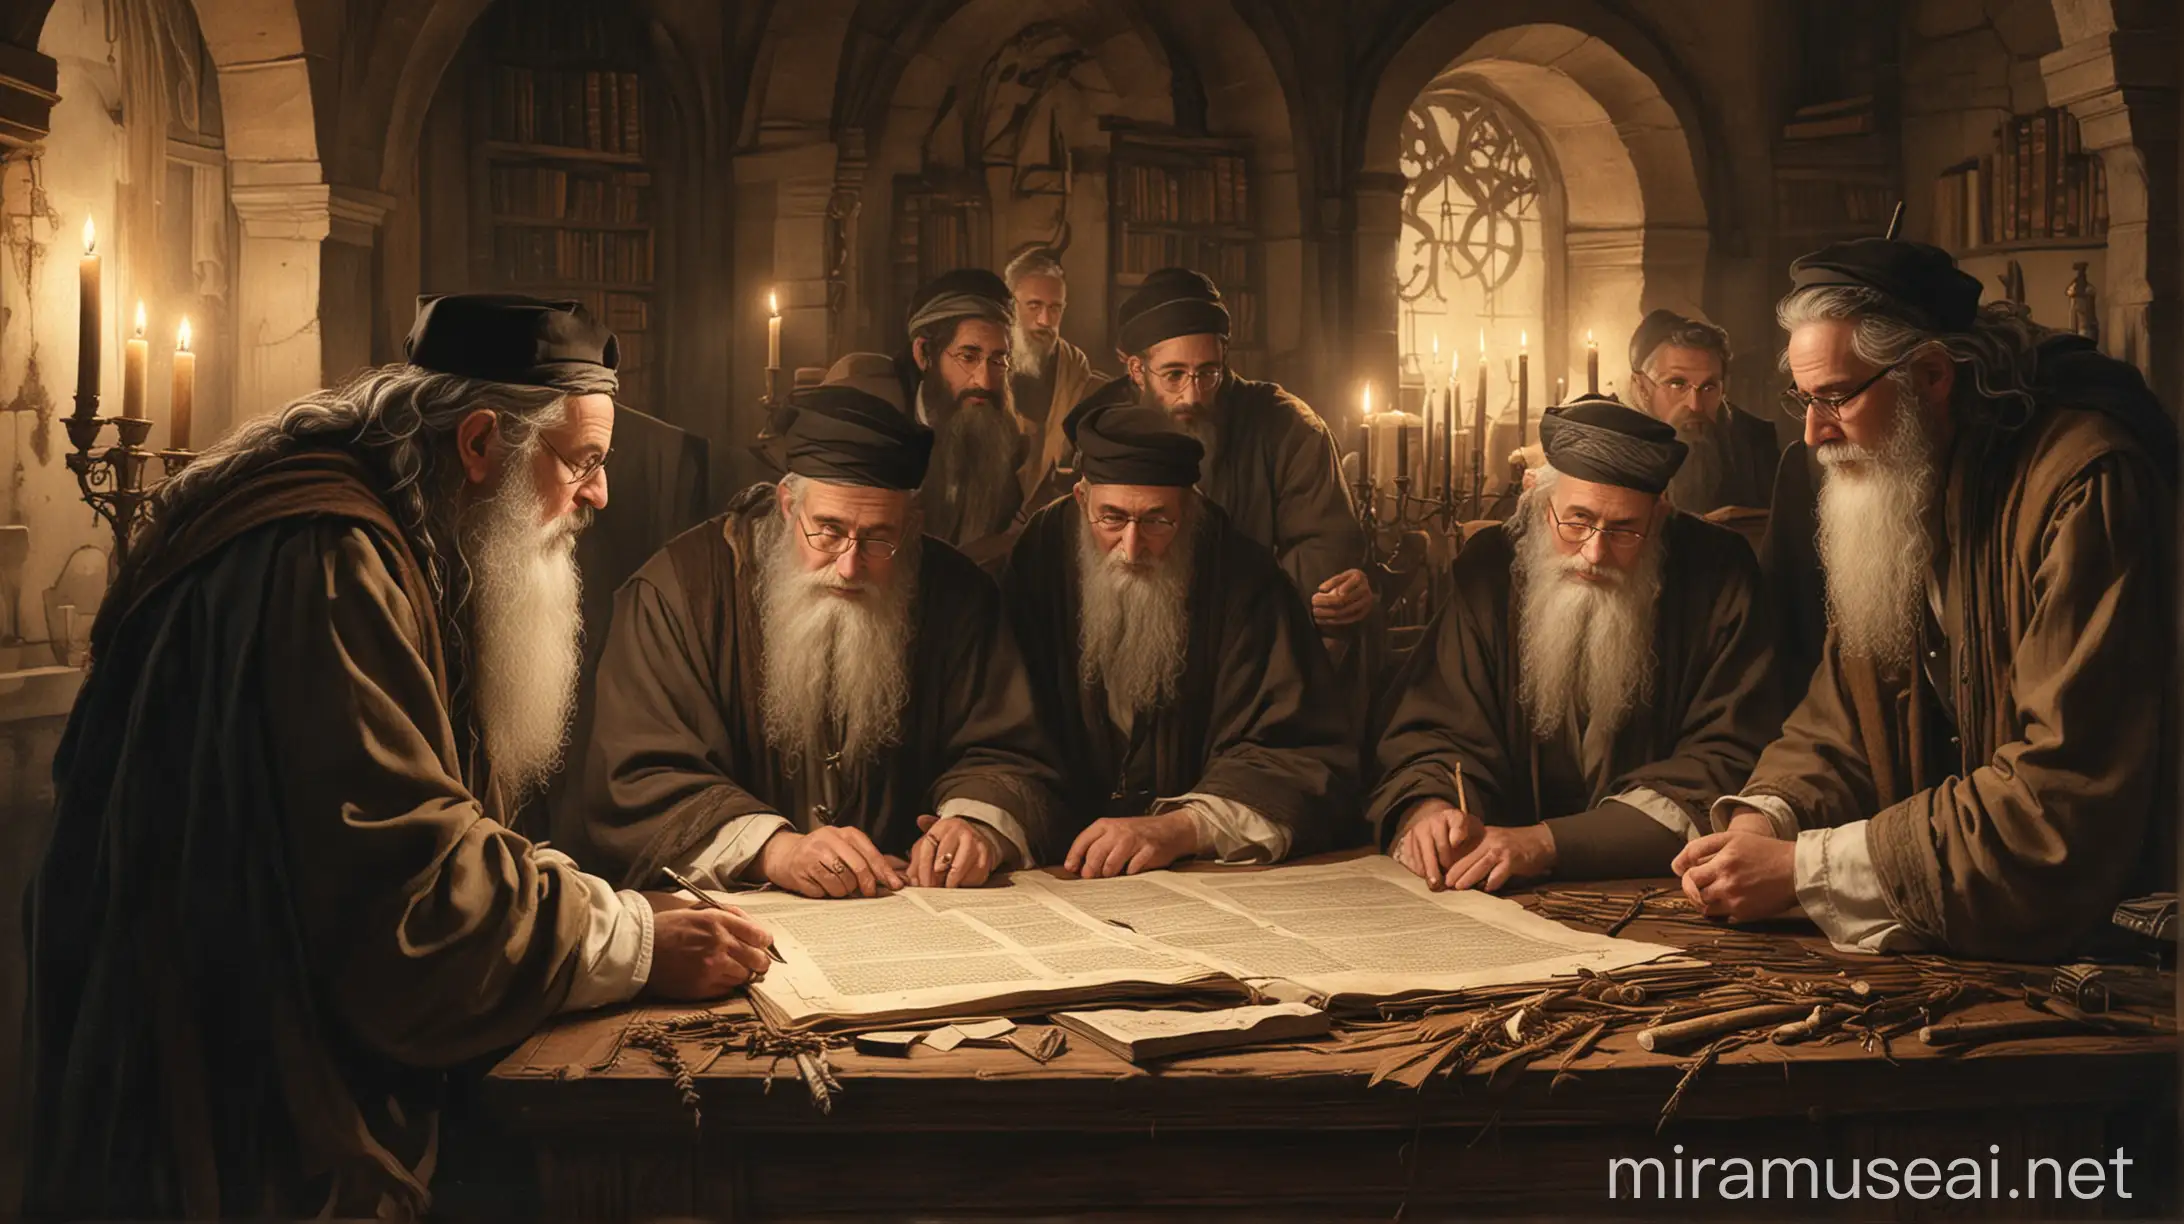 Jewish Scholars Studying Scrolls in Candlelit Room